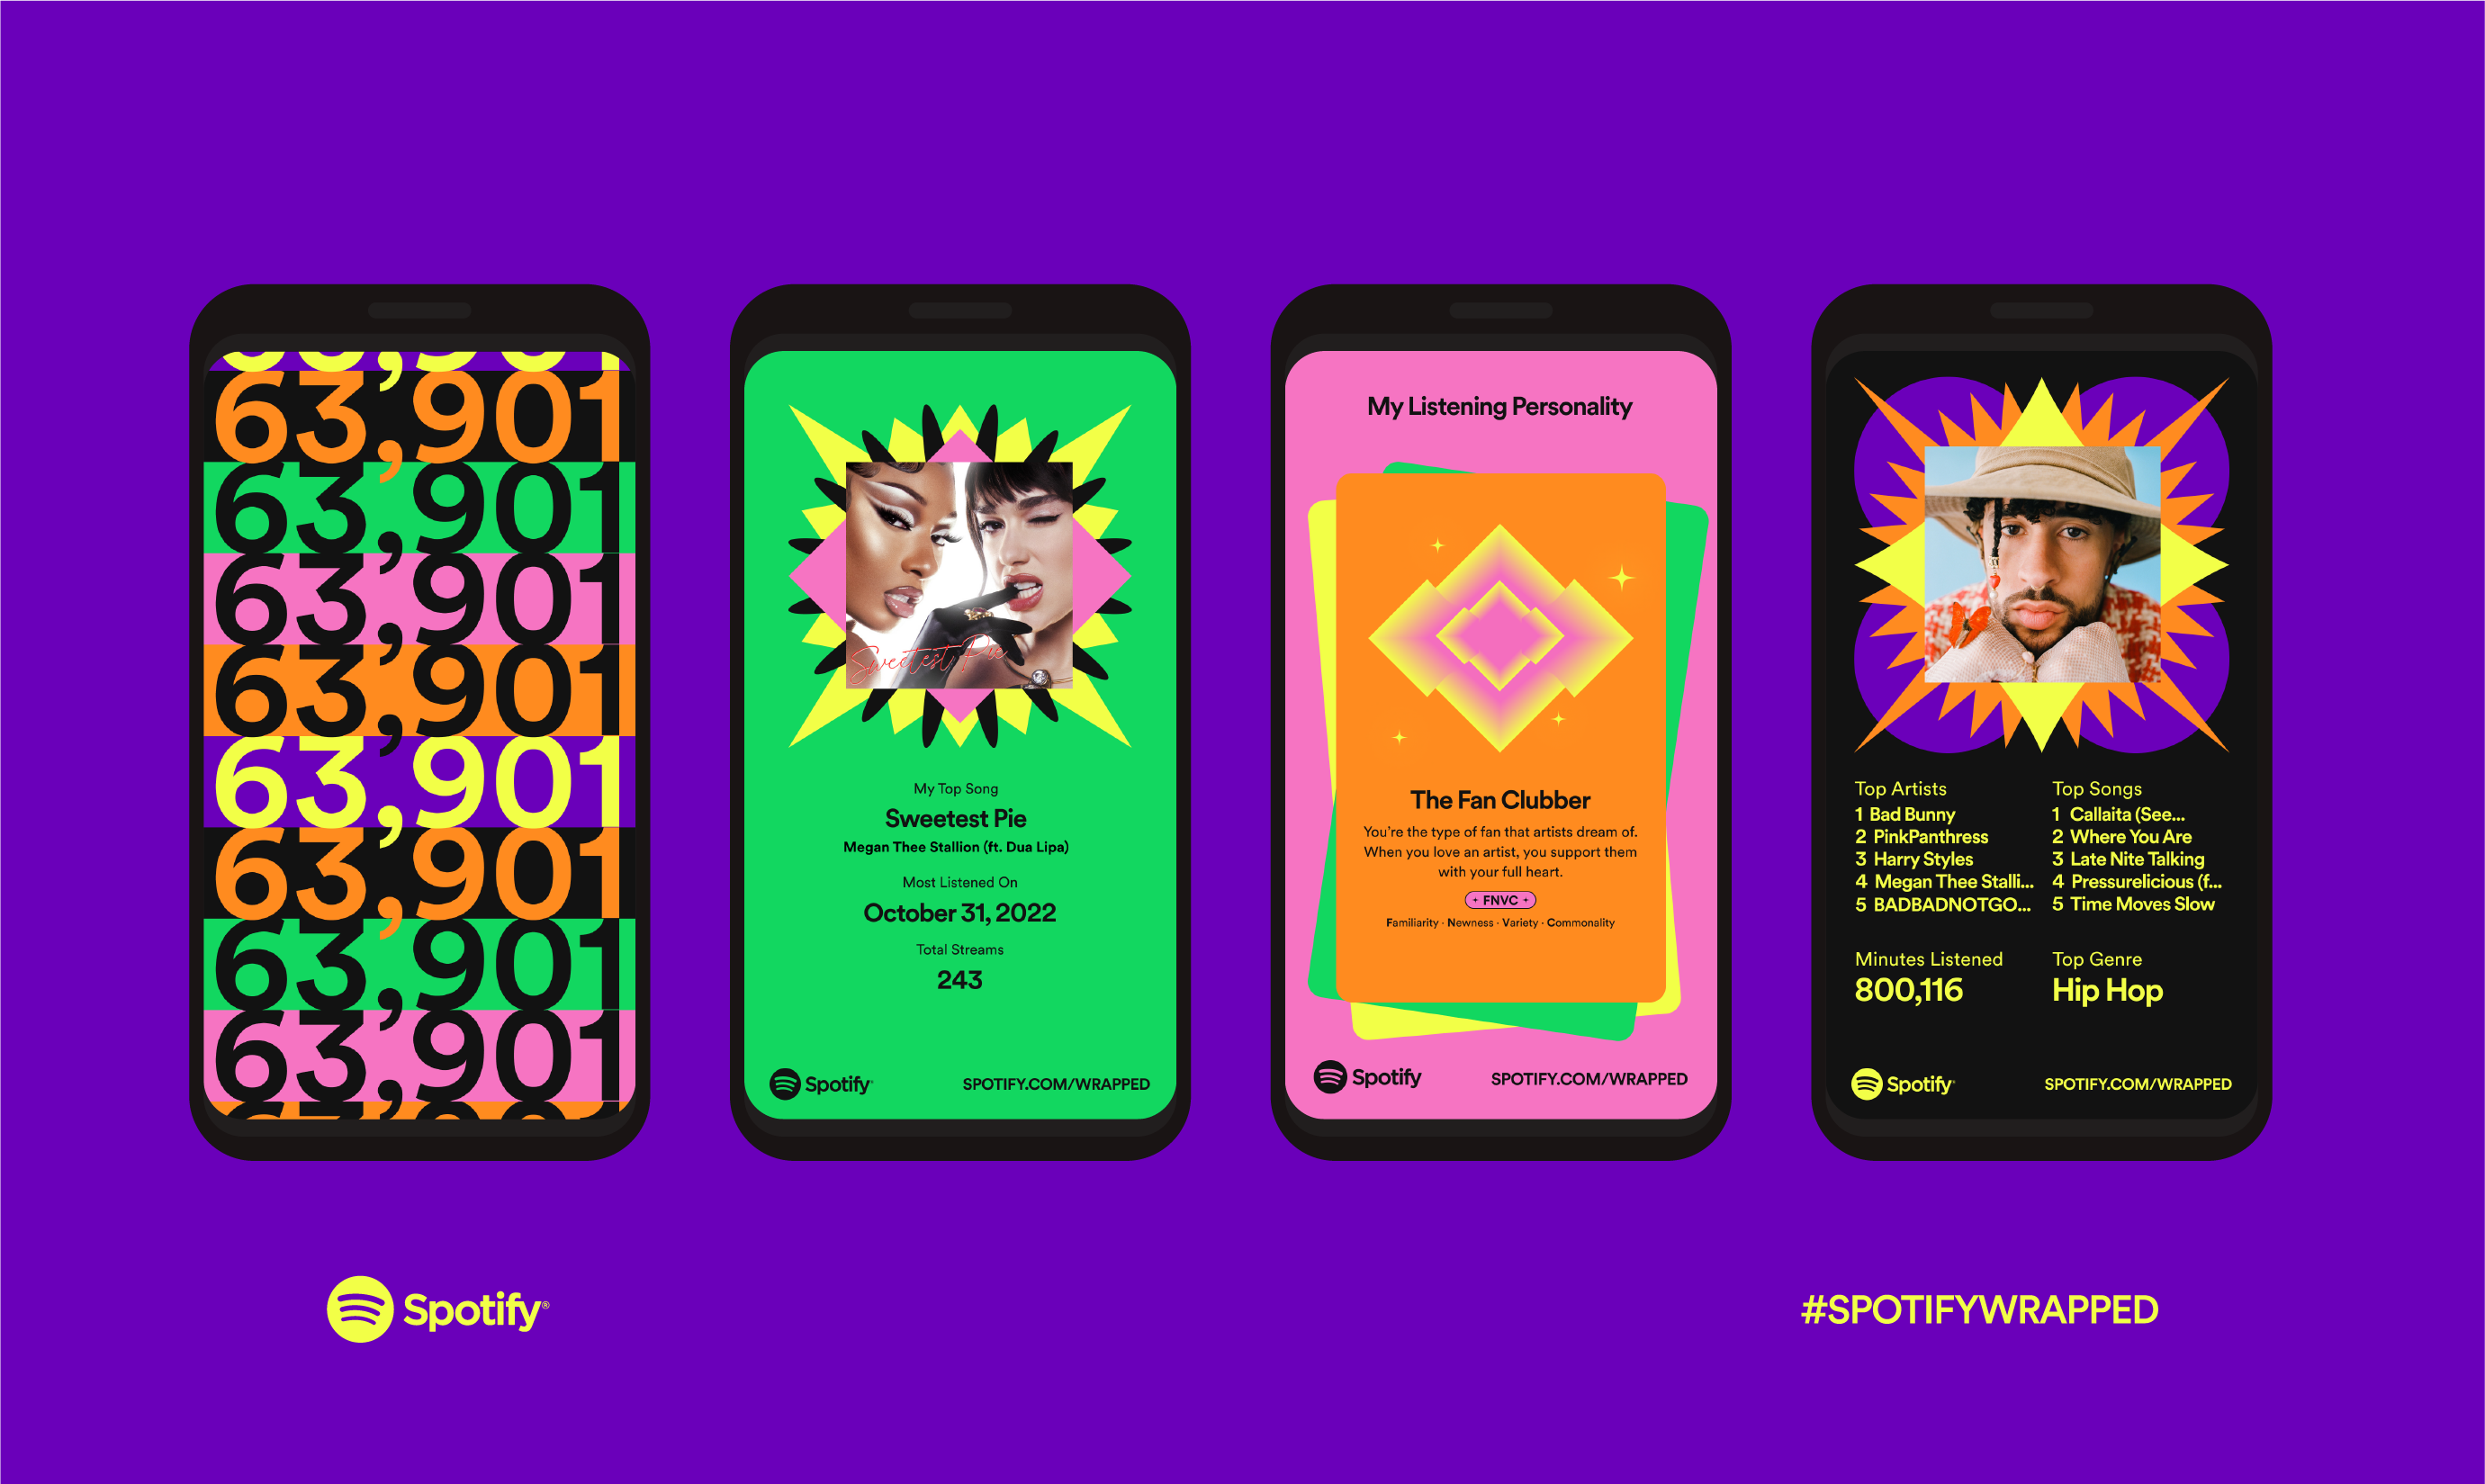 Making Moves Designing Motion for 2022 Wrapped Spotify Design